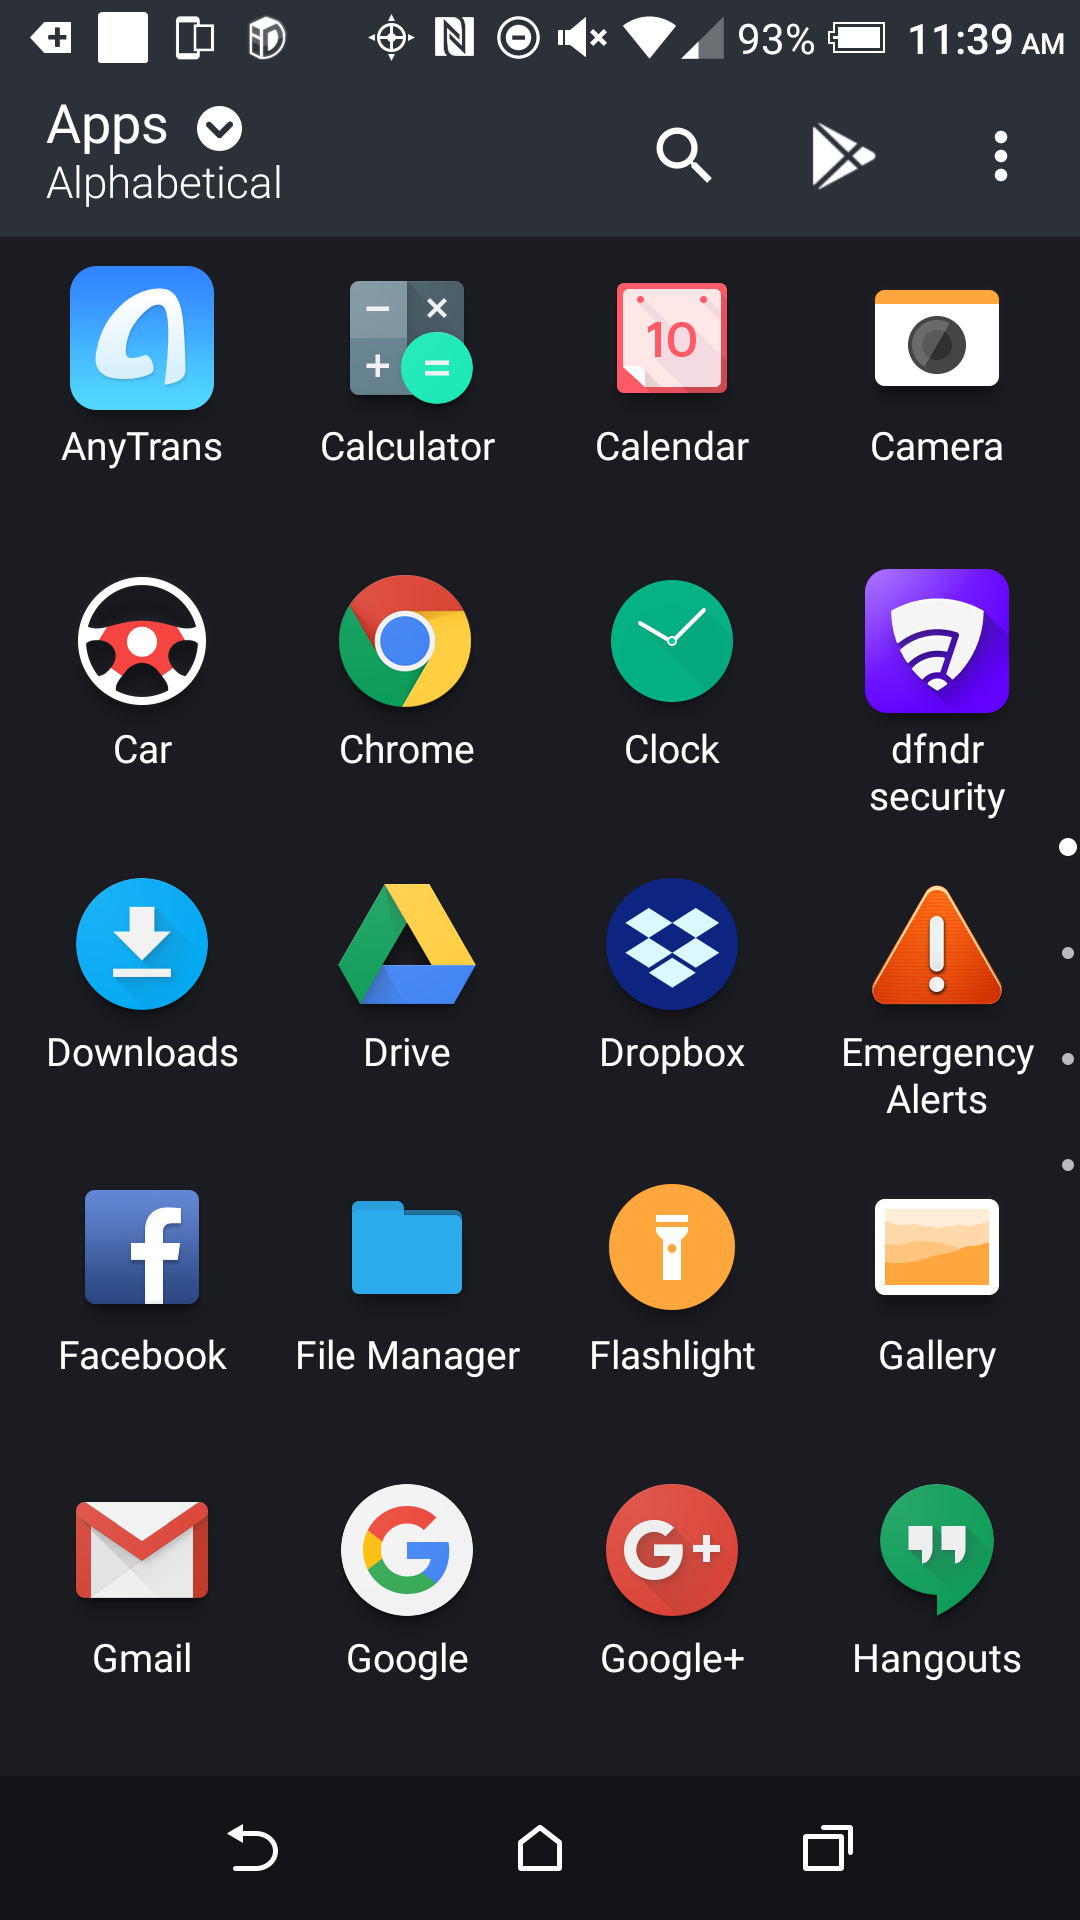 android - all apps - google chrome